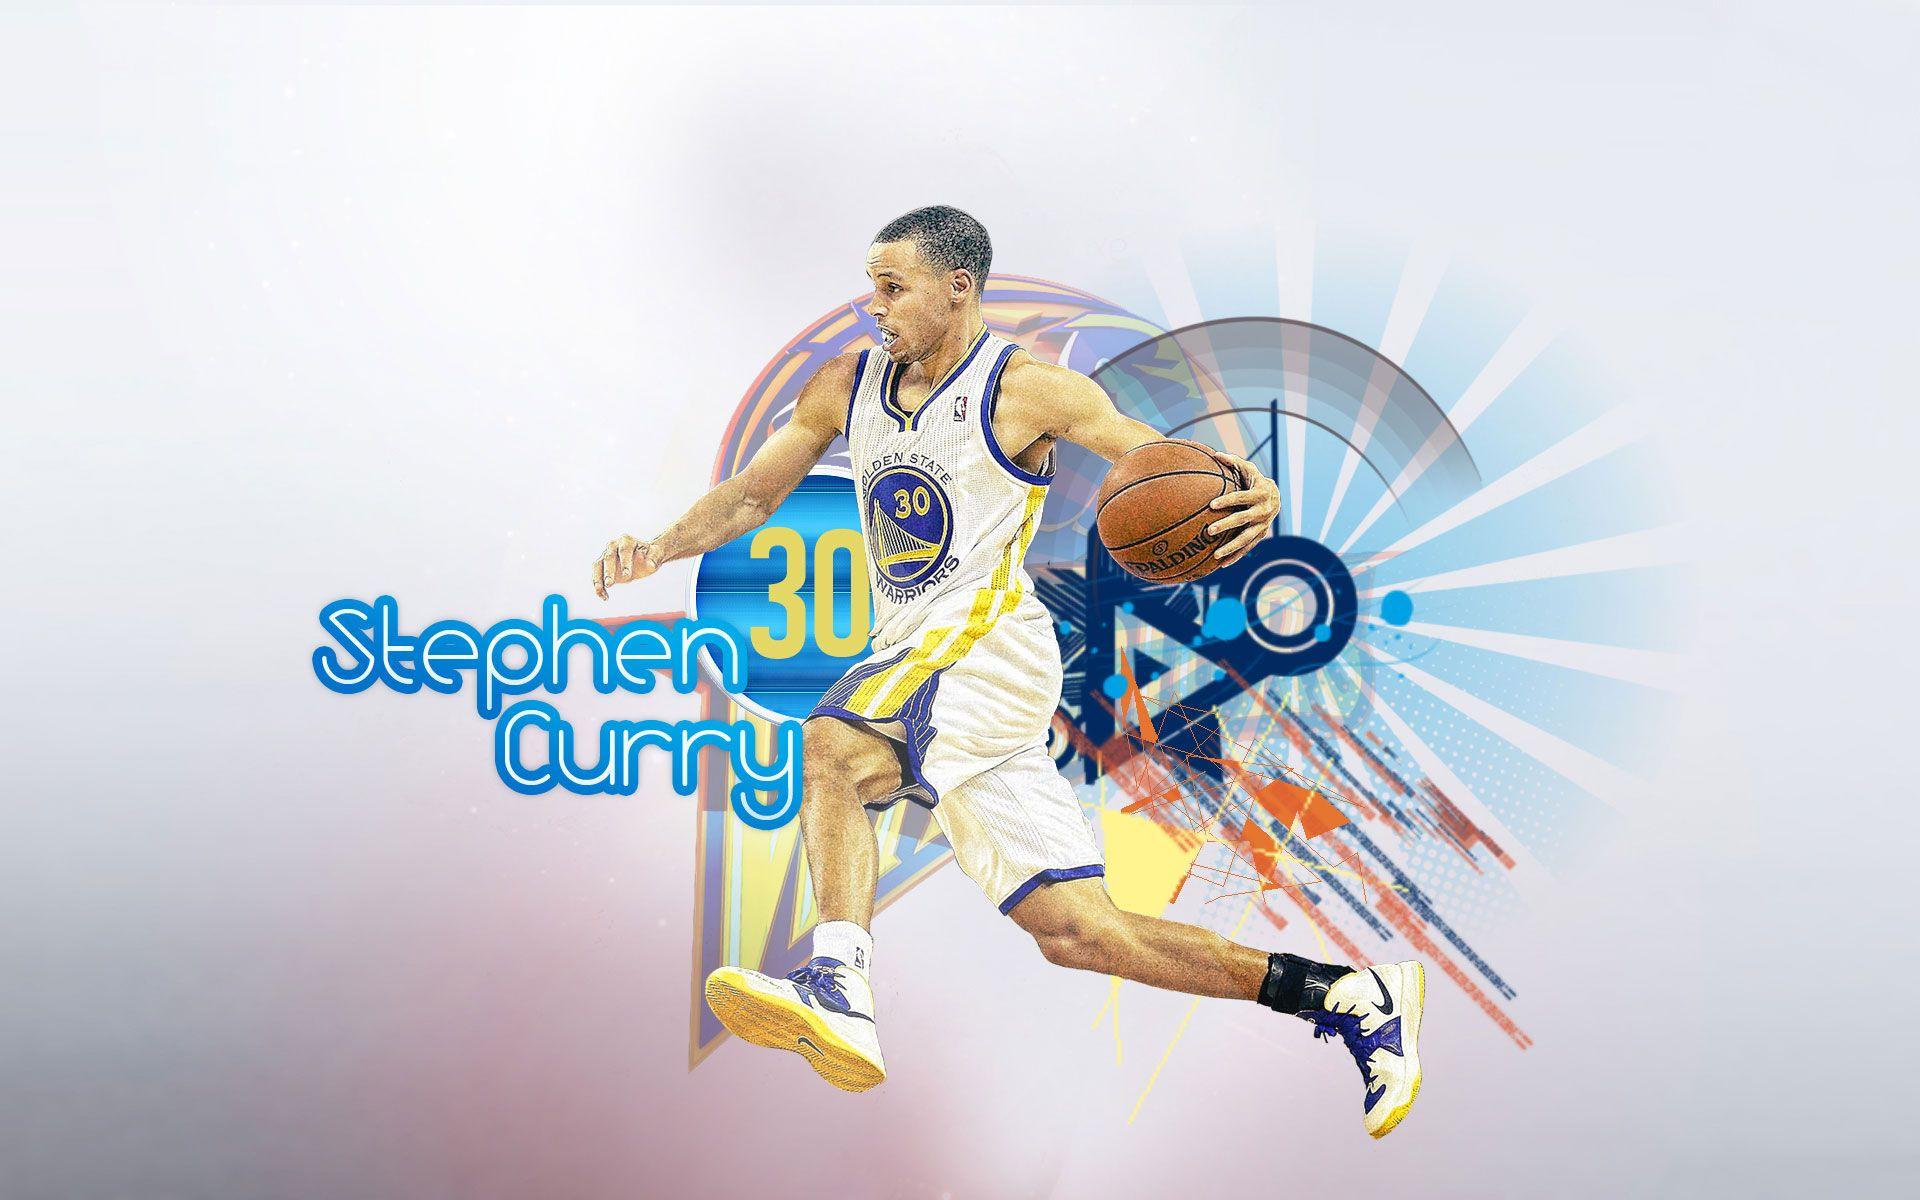 Stephen Curry Wallpaper, Image Collection of Stephen Curry